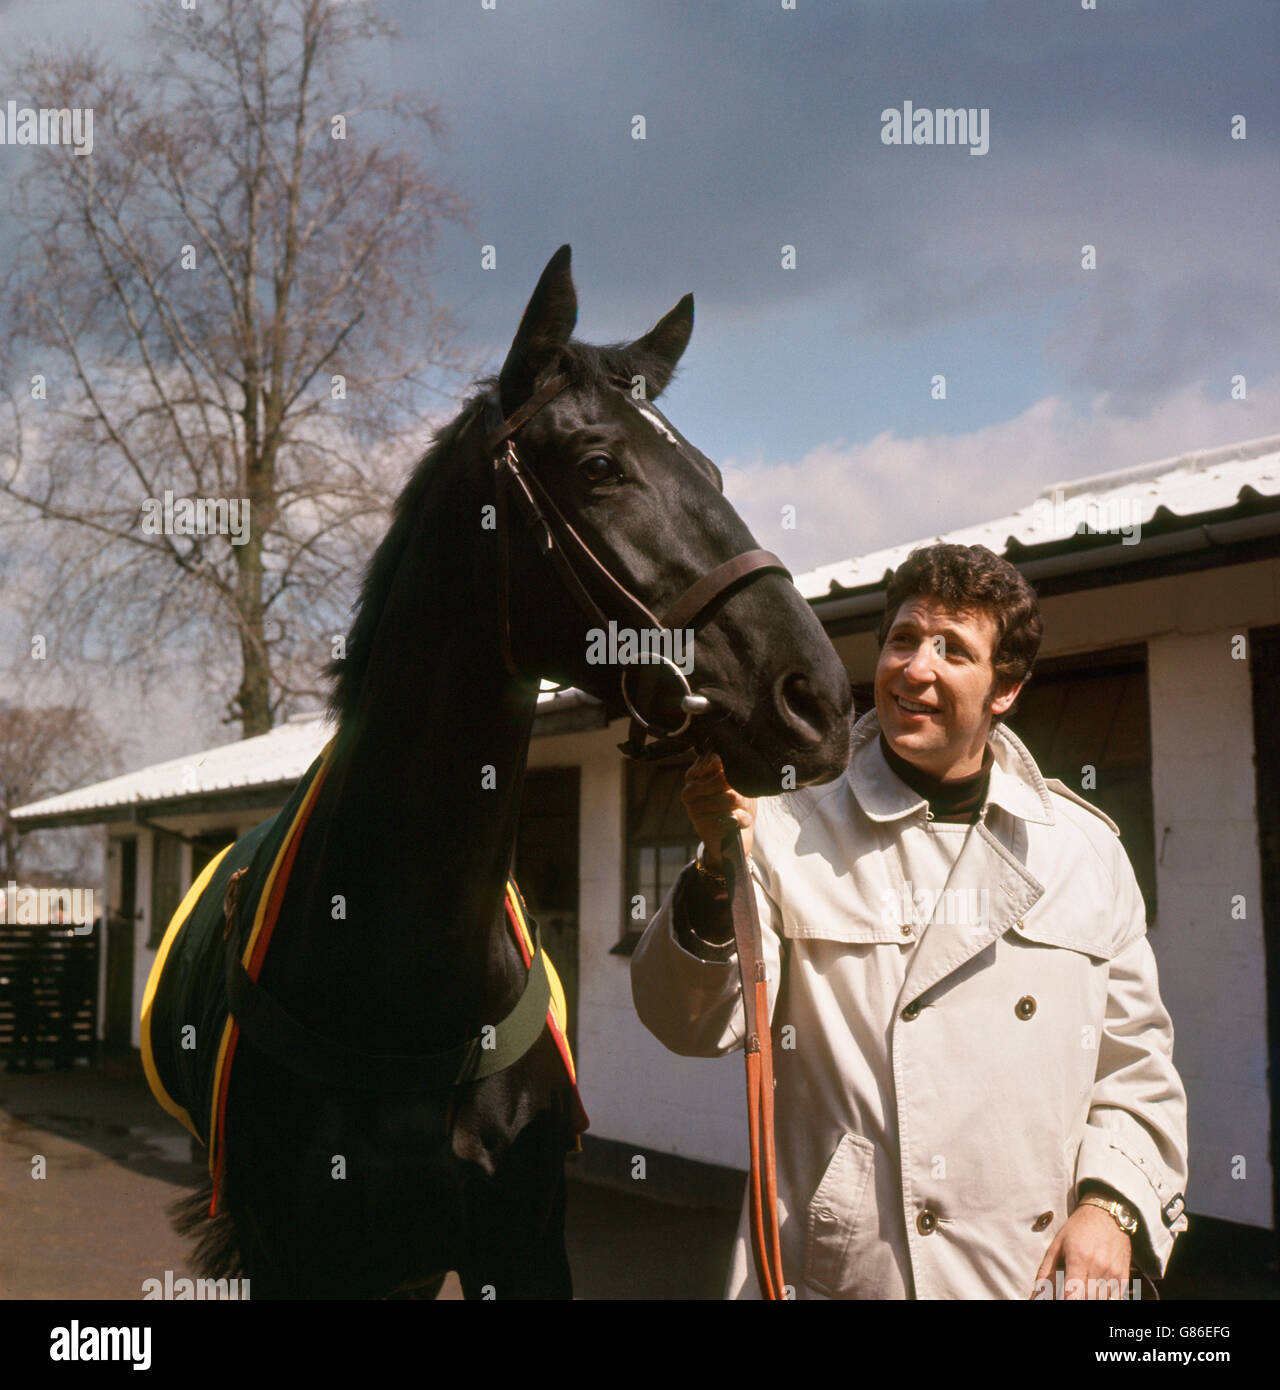 Welsh singer Tom Jones with the racehorse 'Walk On By!' which he has just purchased for an undisclosed sum at Brian Swift's stables at Epsom in Surrey. The racehorse is named after a Burt Bacharach pop song, originally sung by Dionne Warwick. Stock Photo